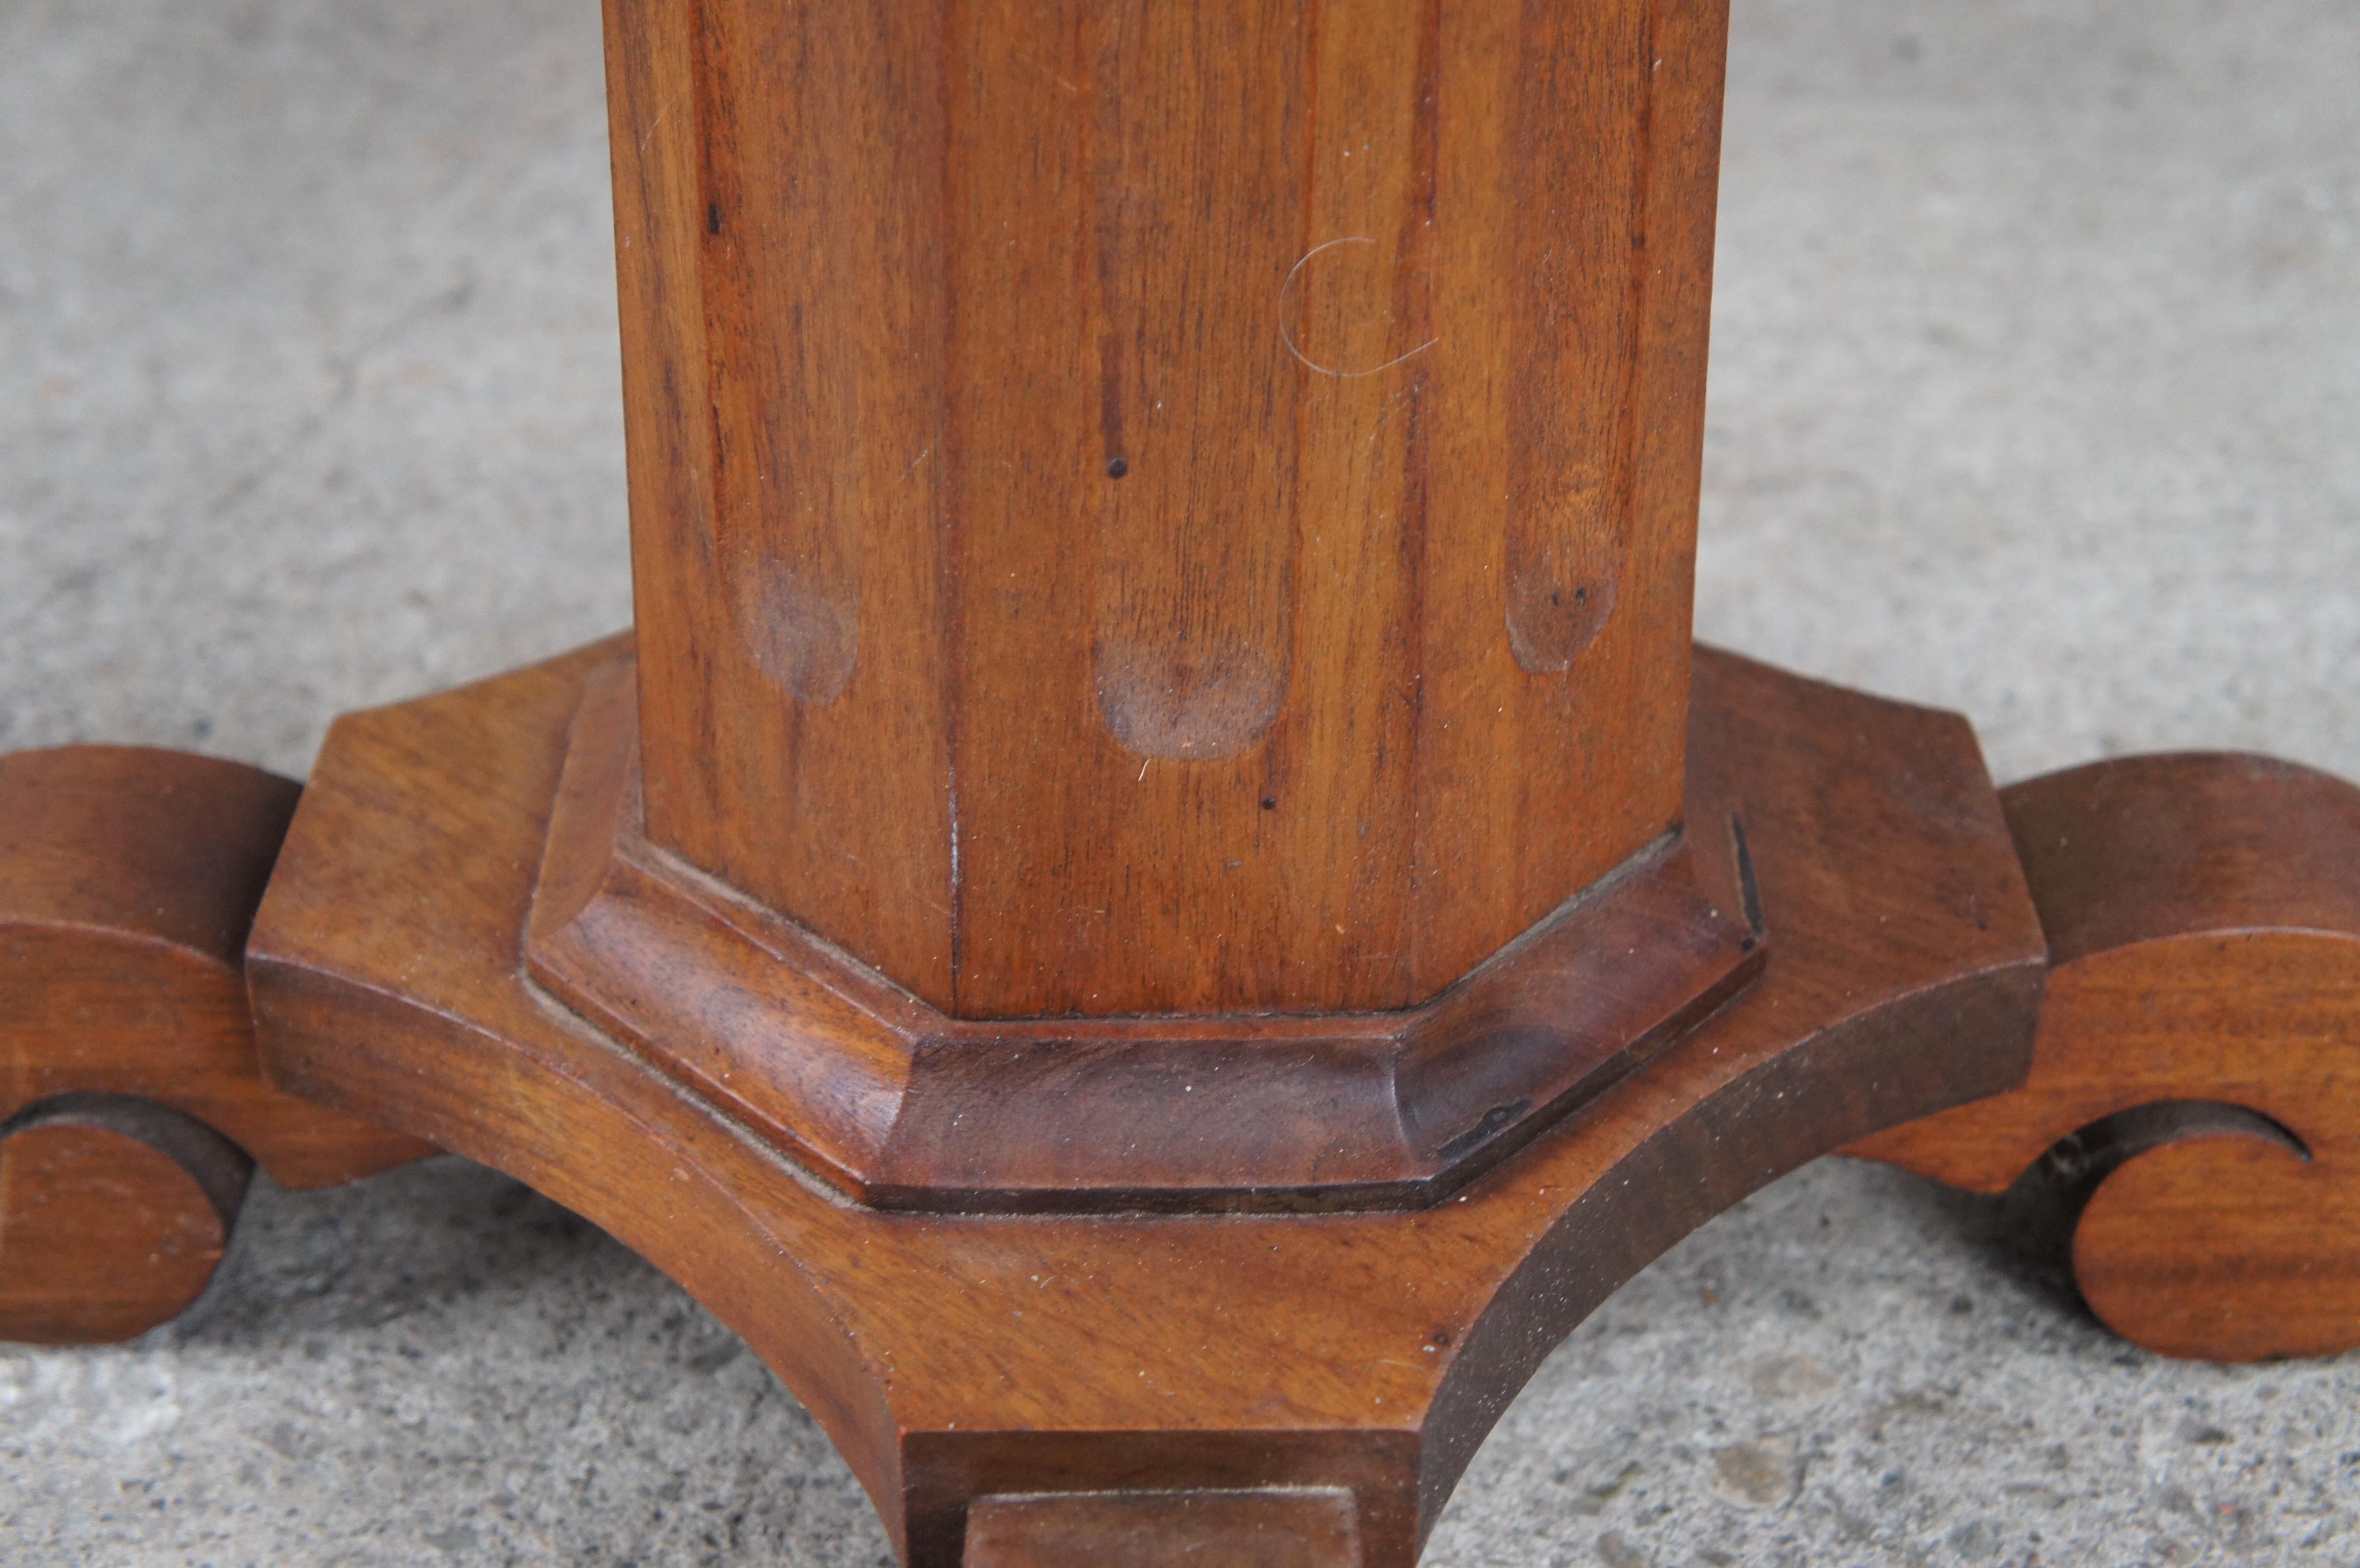 Antique American Classical Empire Mahogany Pedestal Table Sculpture Plant Stand For Sale 2